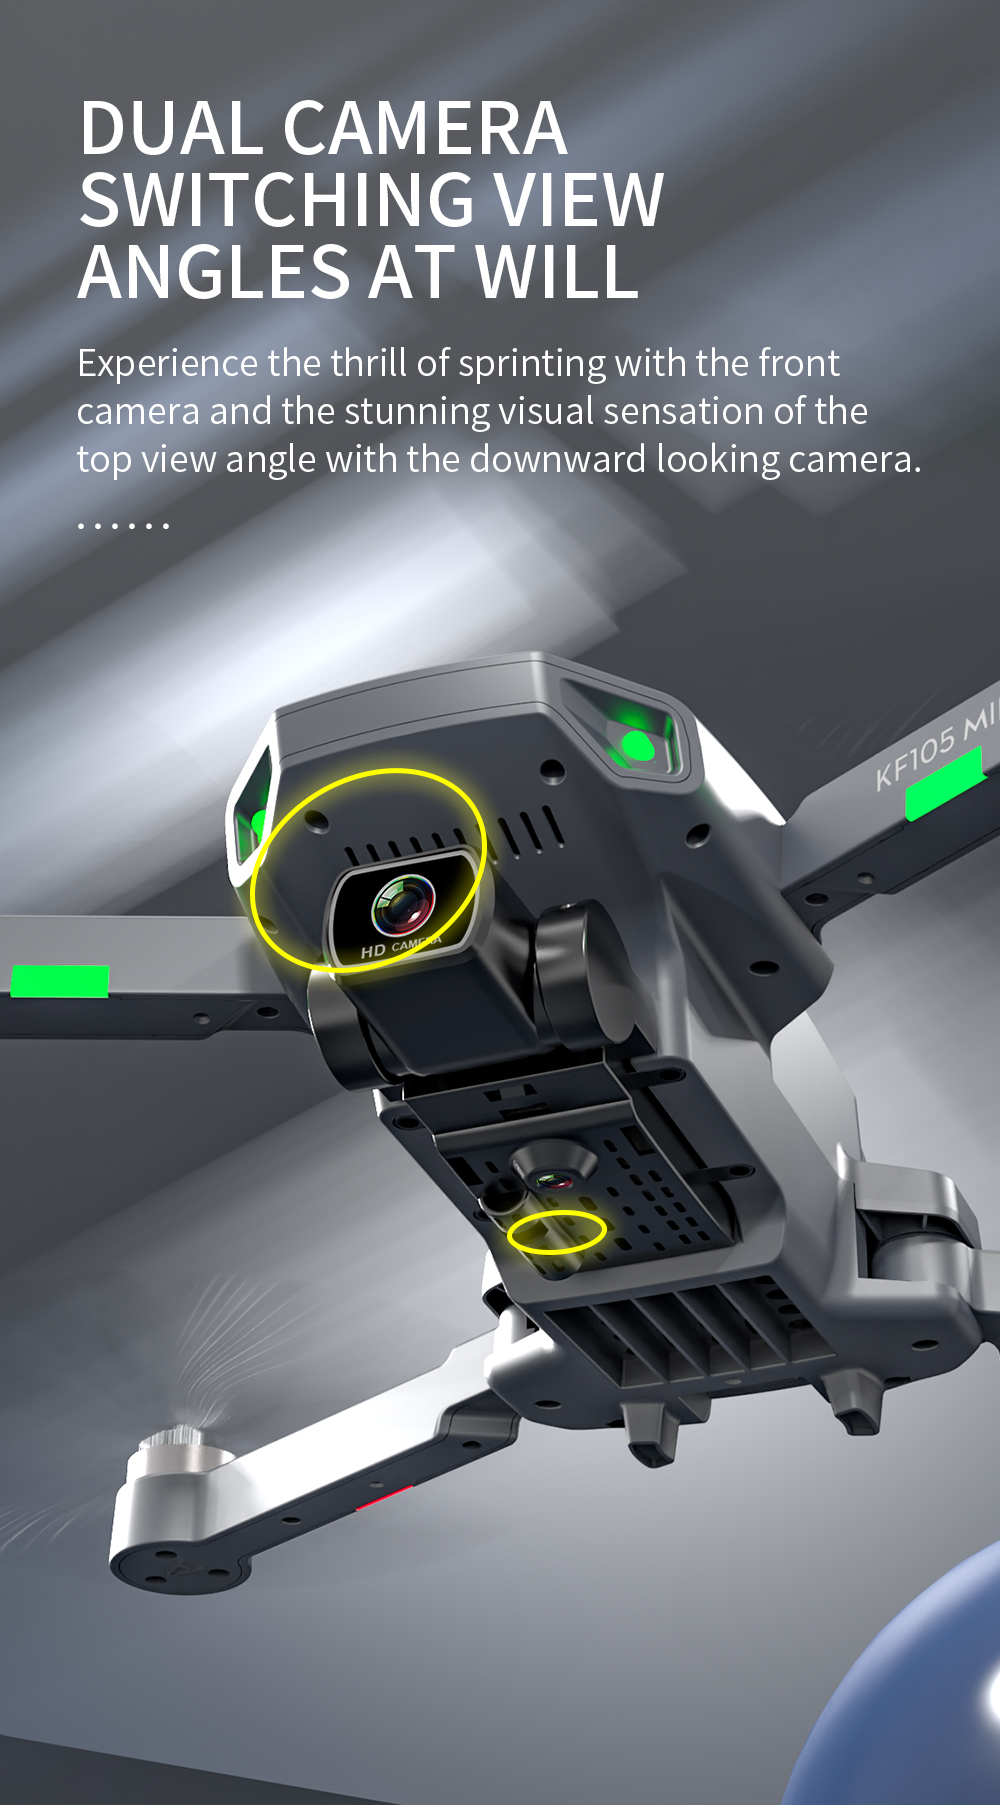 KF-KF105-GPS-5G-WiFi-FPV-with-4K-HD-ESC-Dual-Camera-Visual-Obstacle-Avoidance-Brushless-Foldable-RC--1916966-6